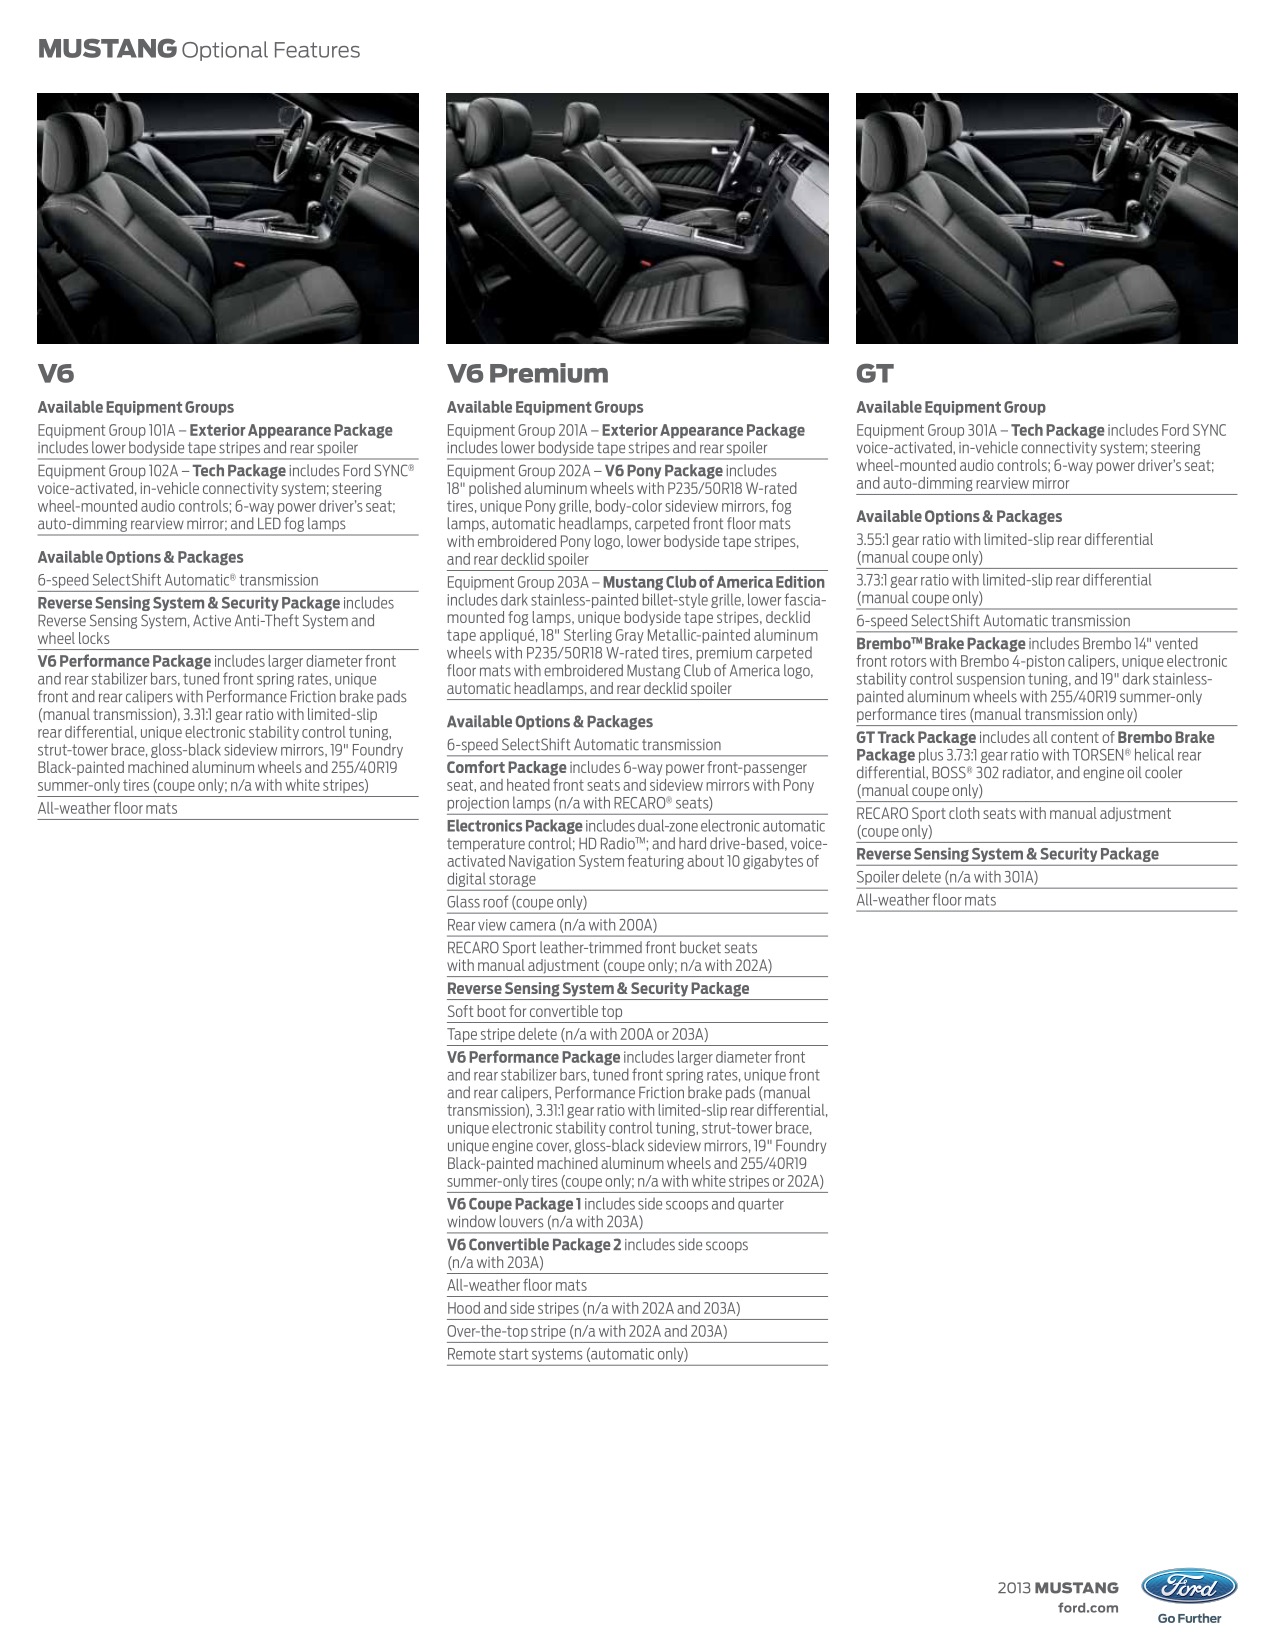 2013 Ford Mustang Brochure Page 4